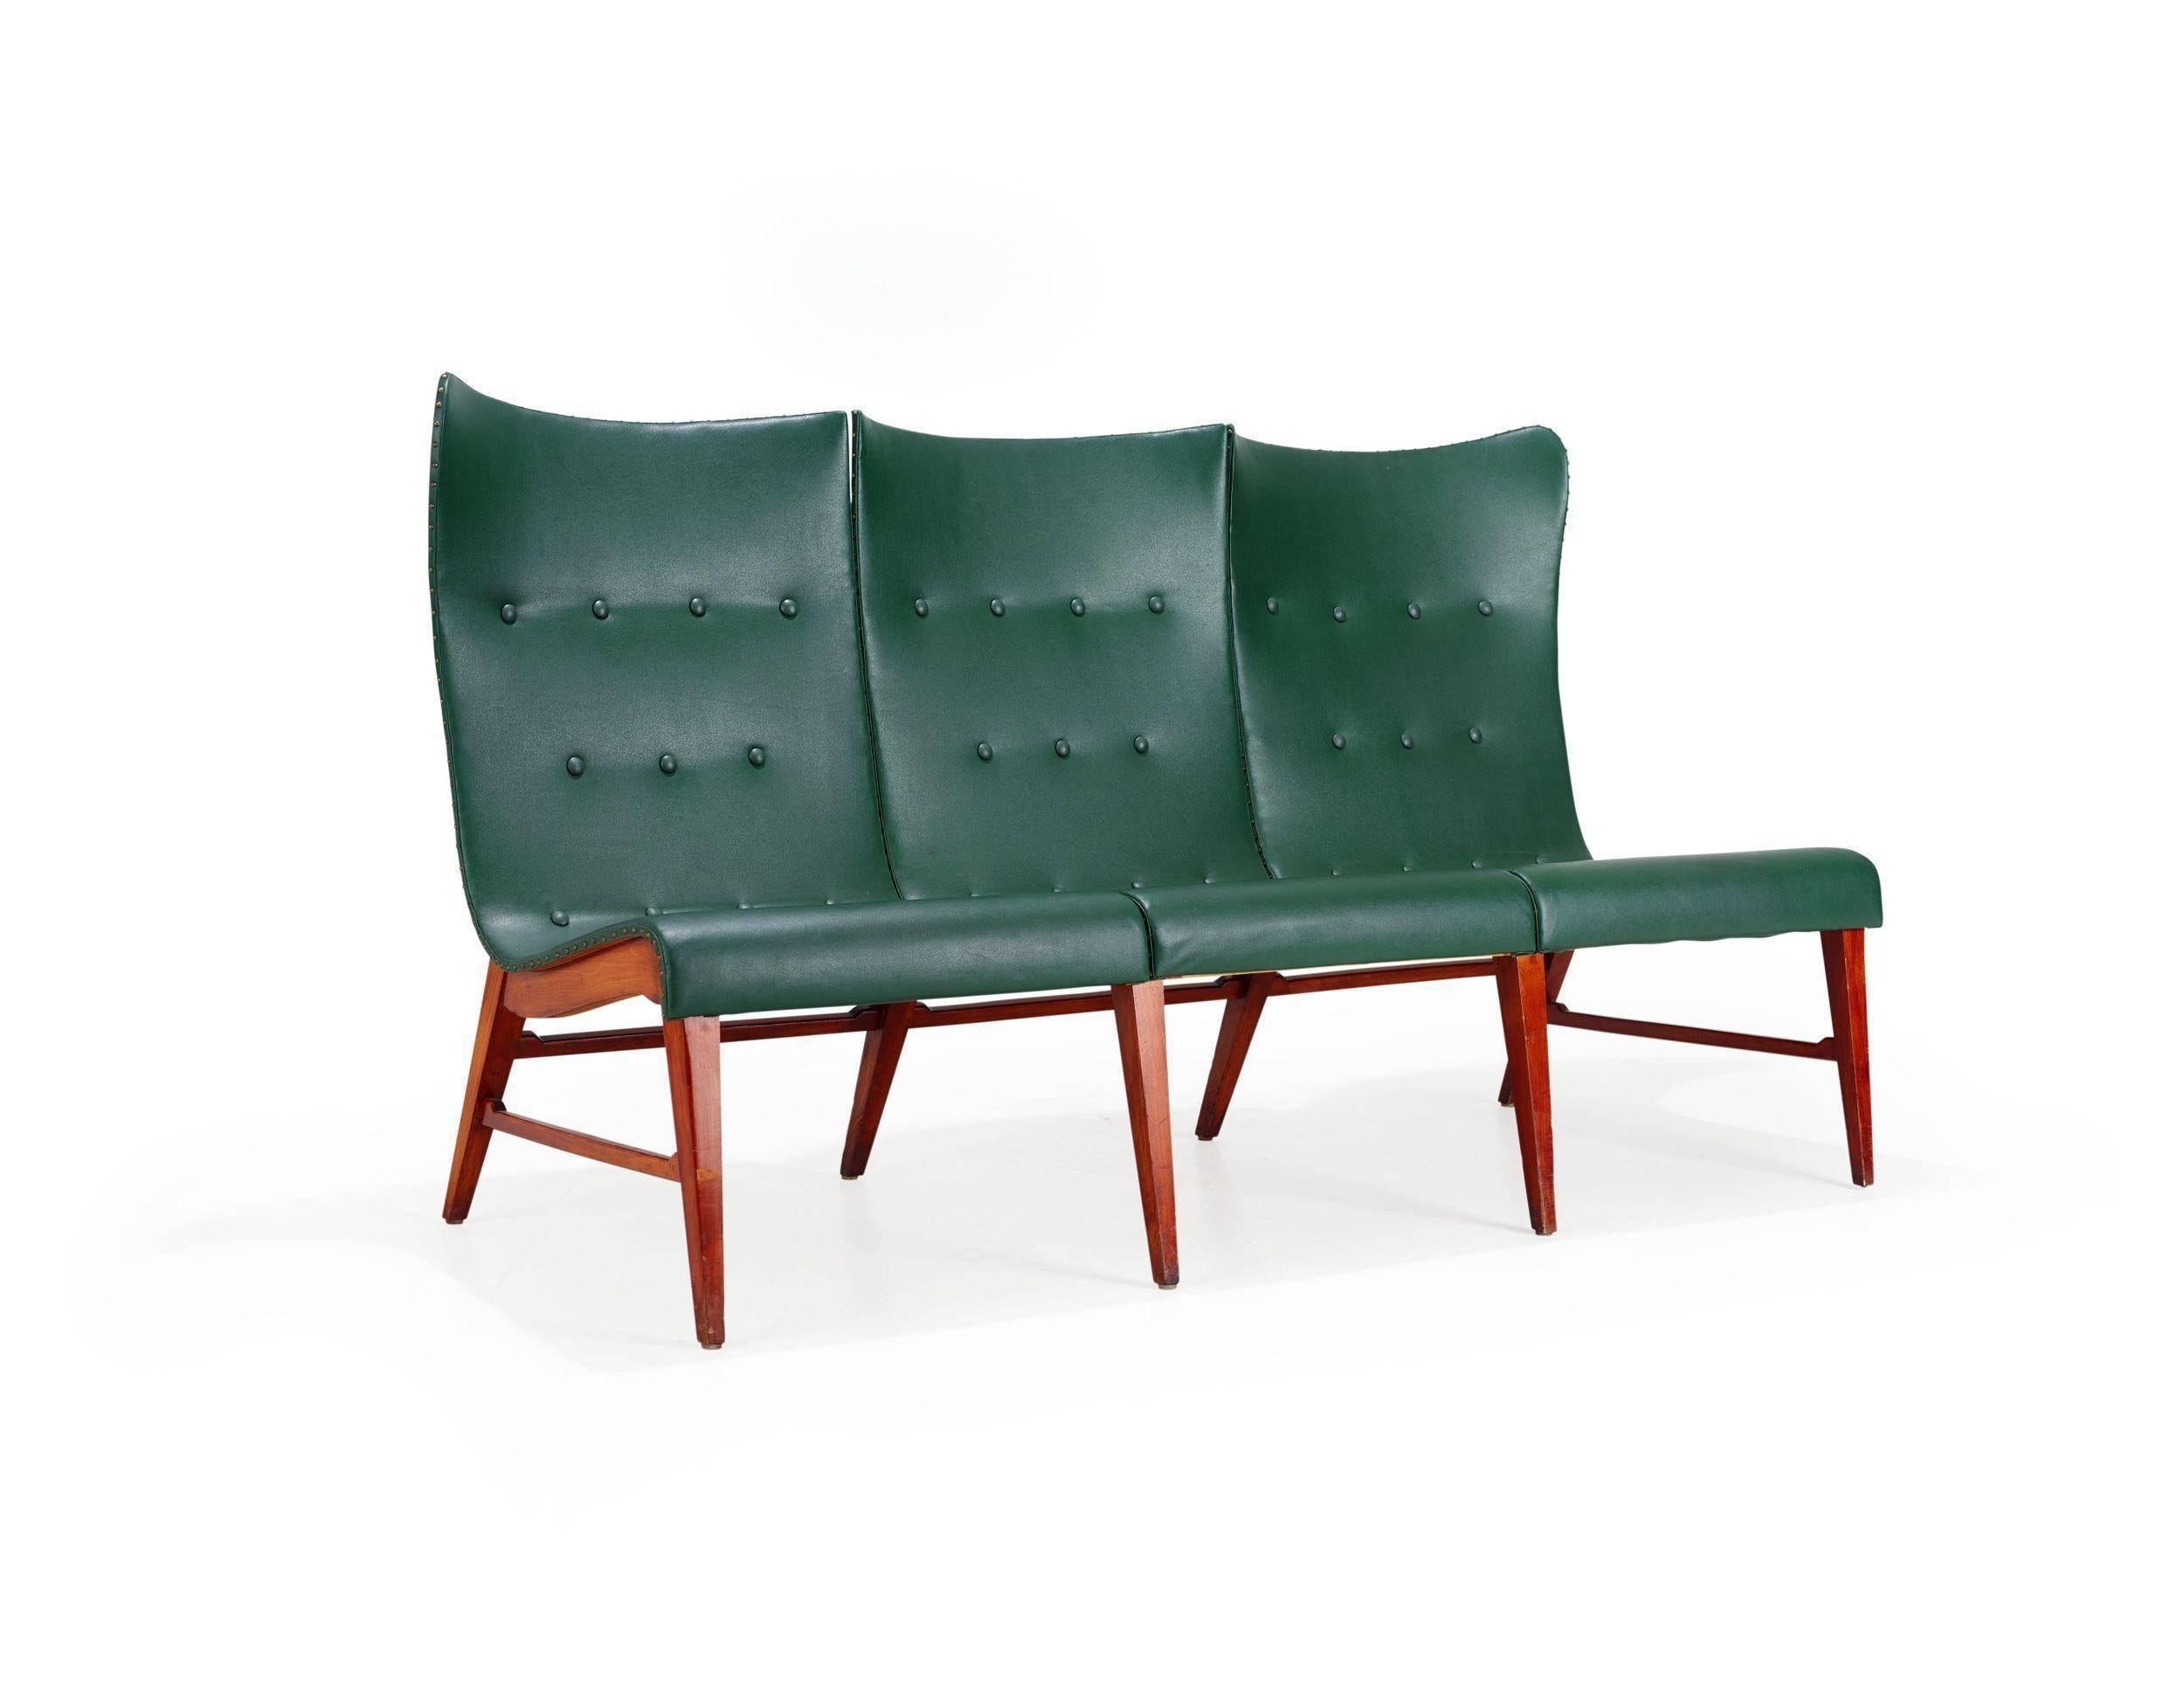 Paneled Mid-Century Modern wingback sofa by Axel Larsson, circa 1950 for Bodafors. Back panels and base in mahogany. Covered in original aqua leather with. In original vintage condition with some slight staining on leather.